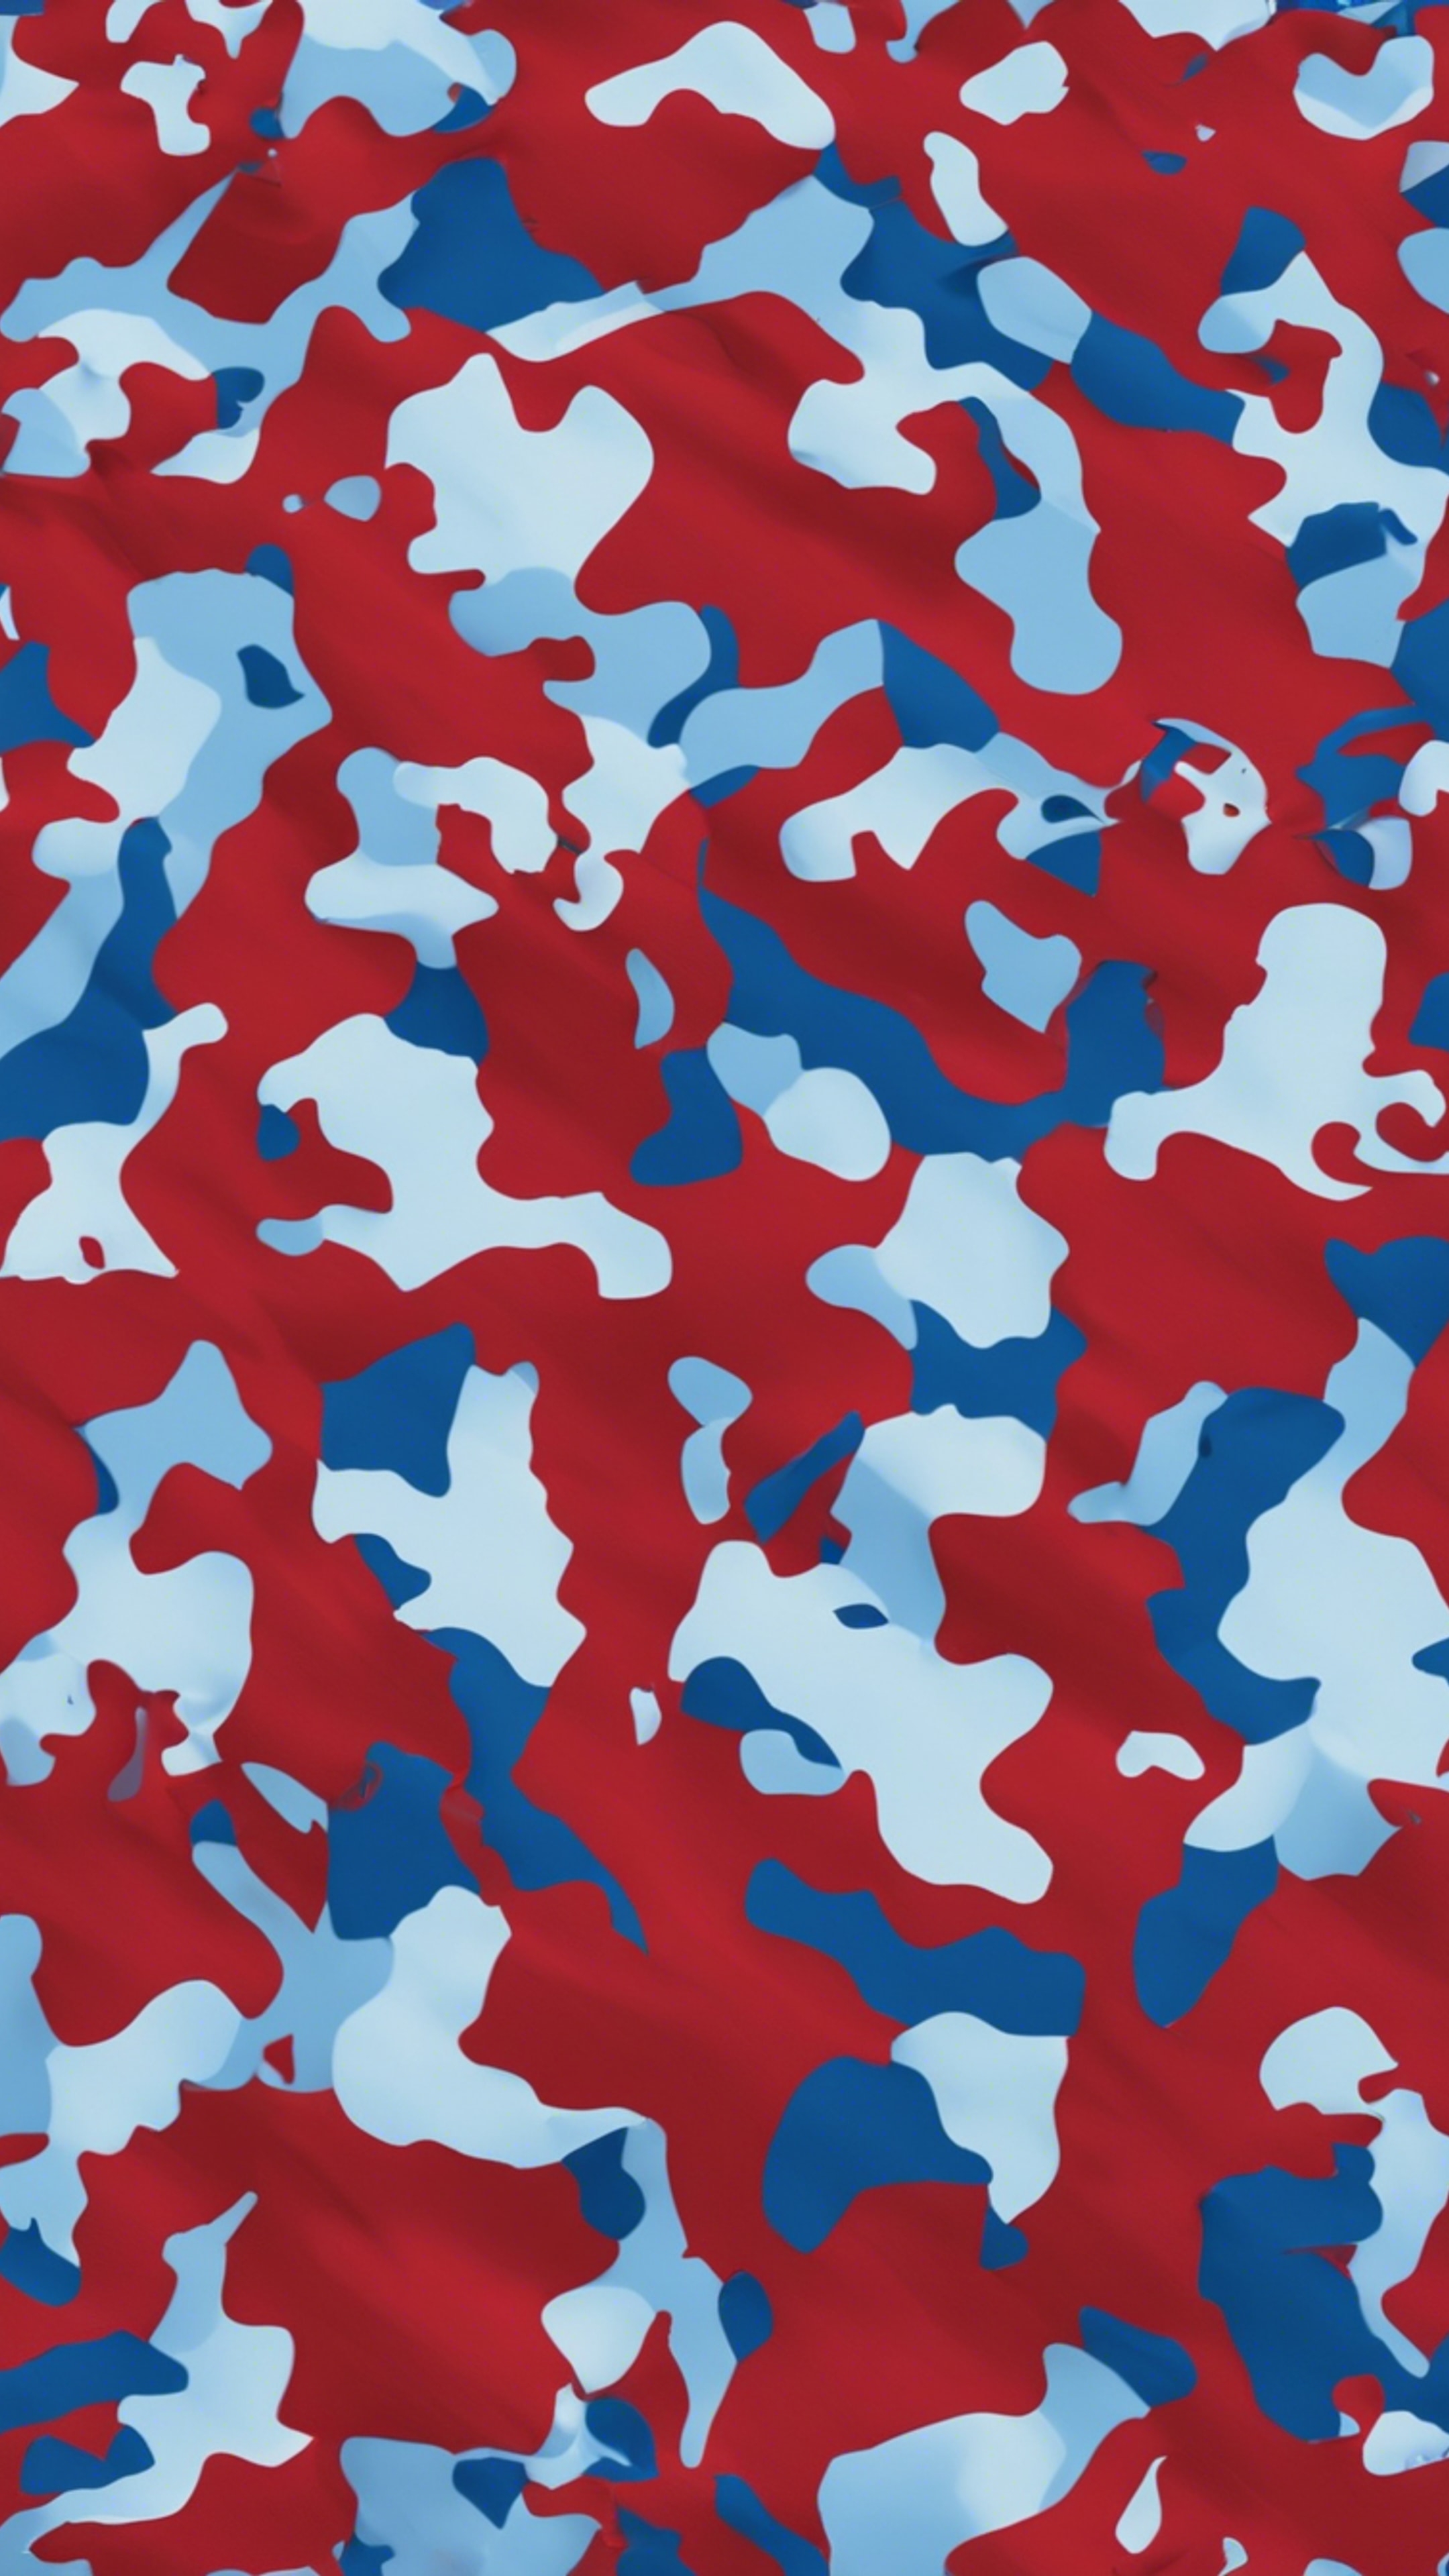 A seamles pattern of red and blue camouflage. Tapetai[edd7b72010f24e93b1c5]